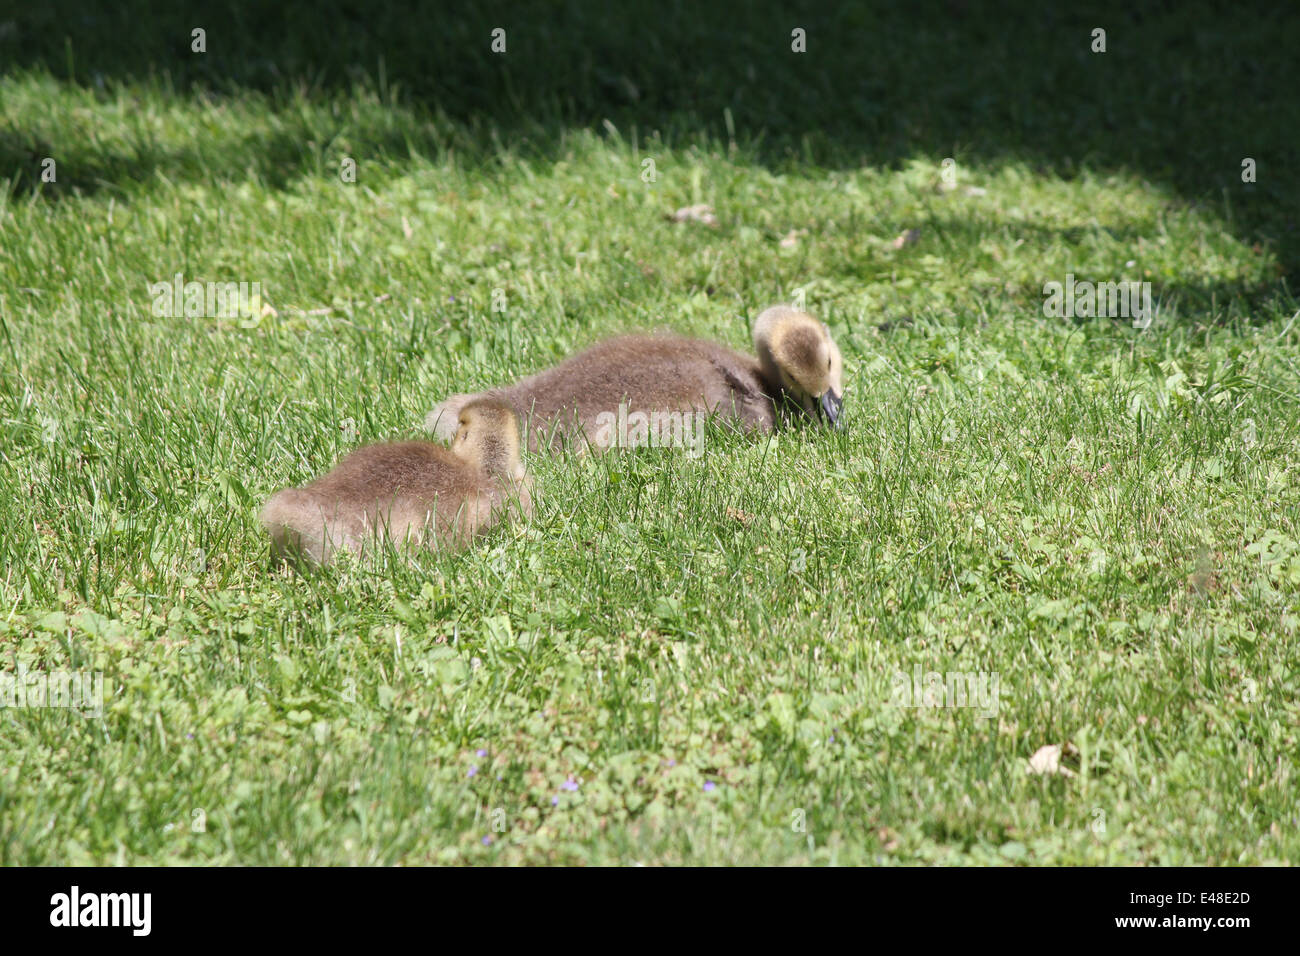 Fuzzy little gosling's (Canada Geese) about 1 month old in the grass foraging for food Stock Photo